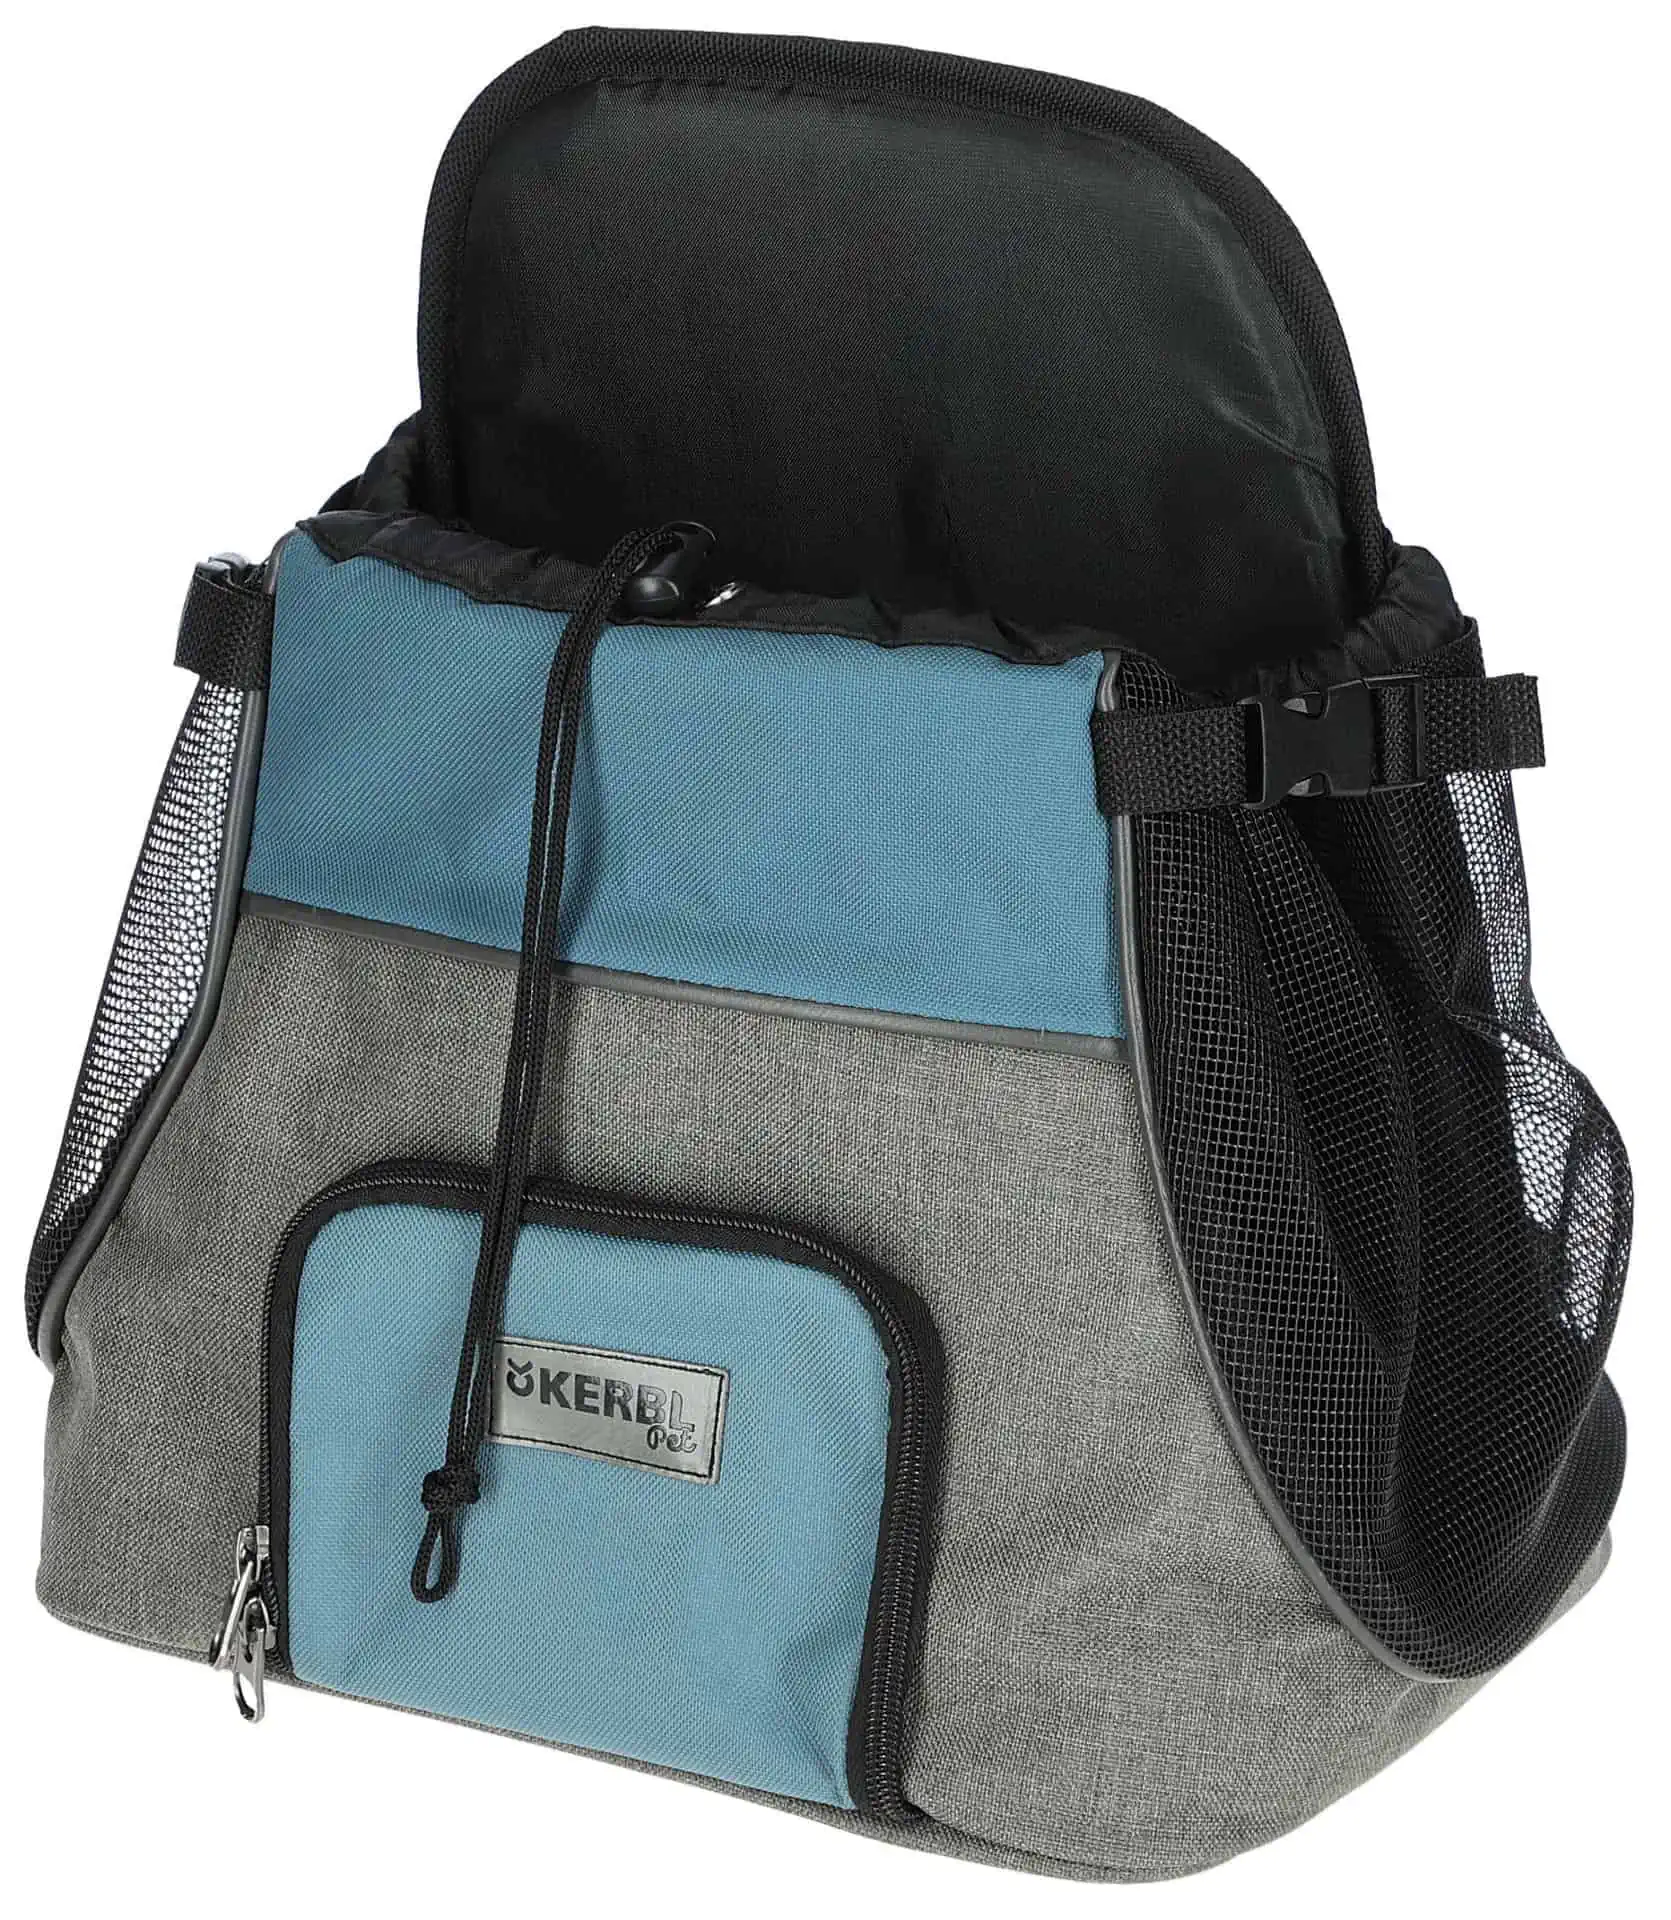 Front Pet Carrier Vacation 31 x 24 x 38 cm, grey/blue